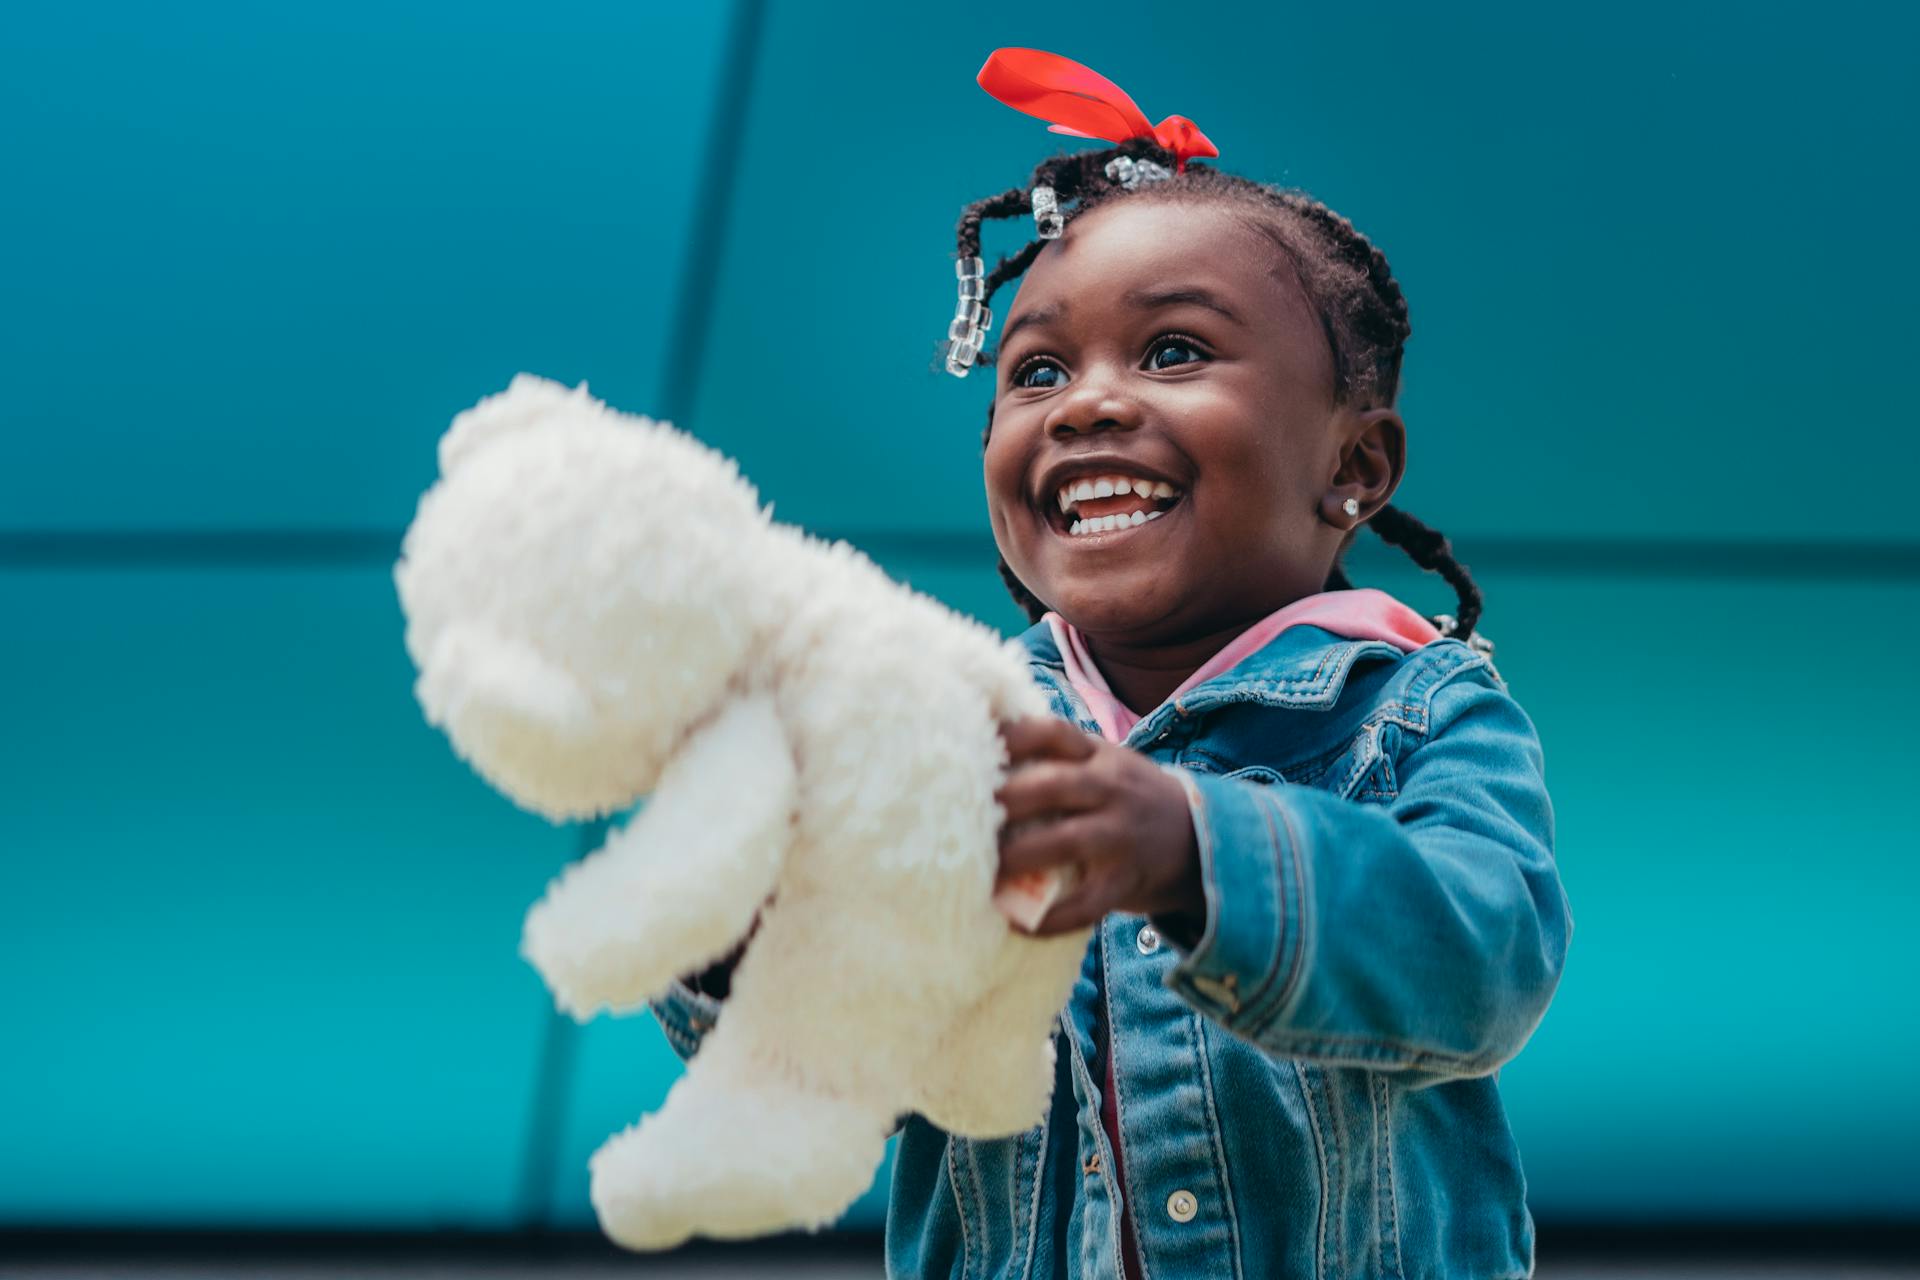 Happy young girl holding a teddy | Source: Pexels